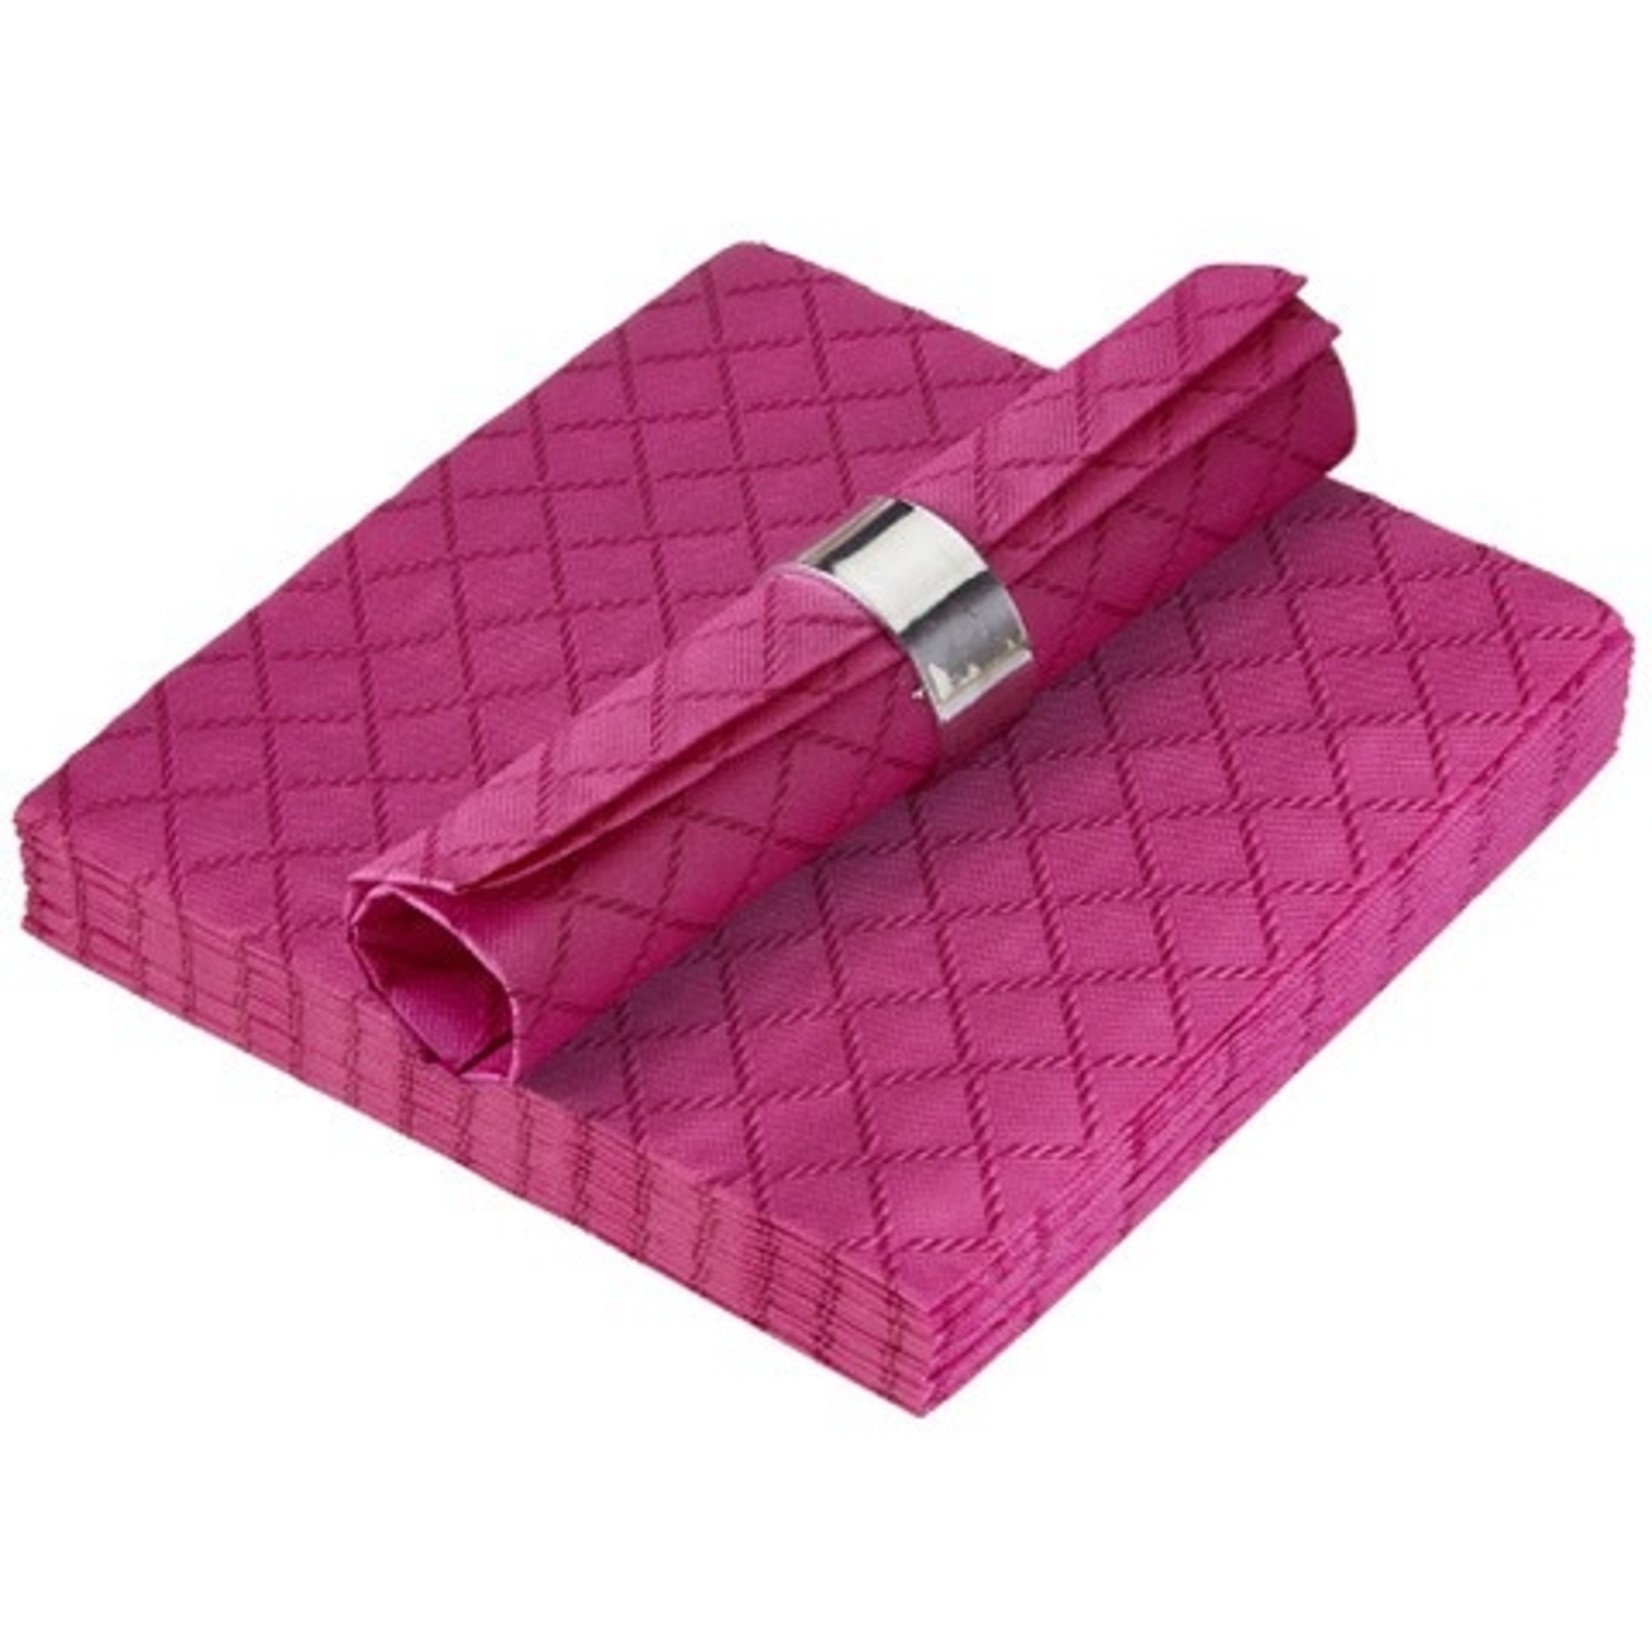 Silverspoons Quilted Pink, Luncheon Napkins - 16/Pack